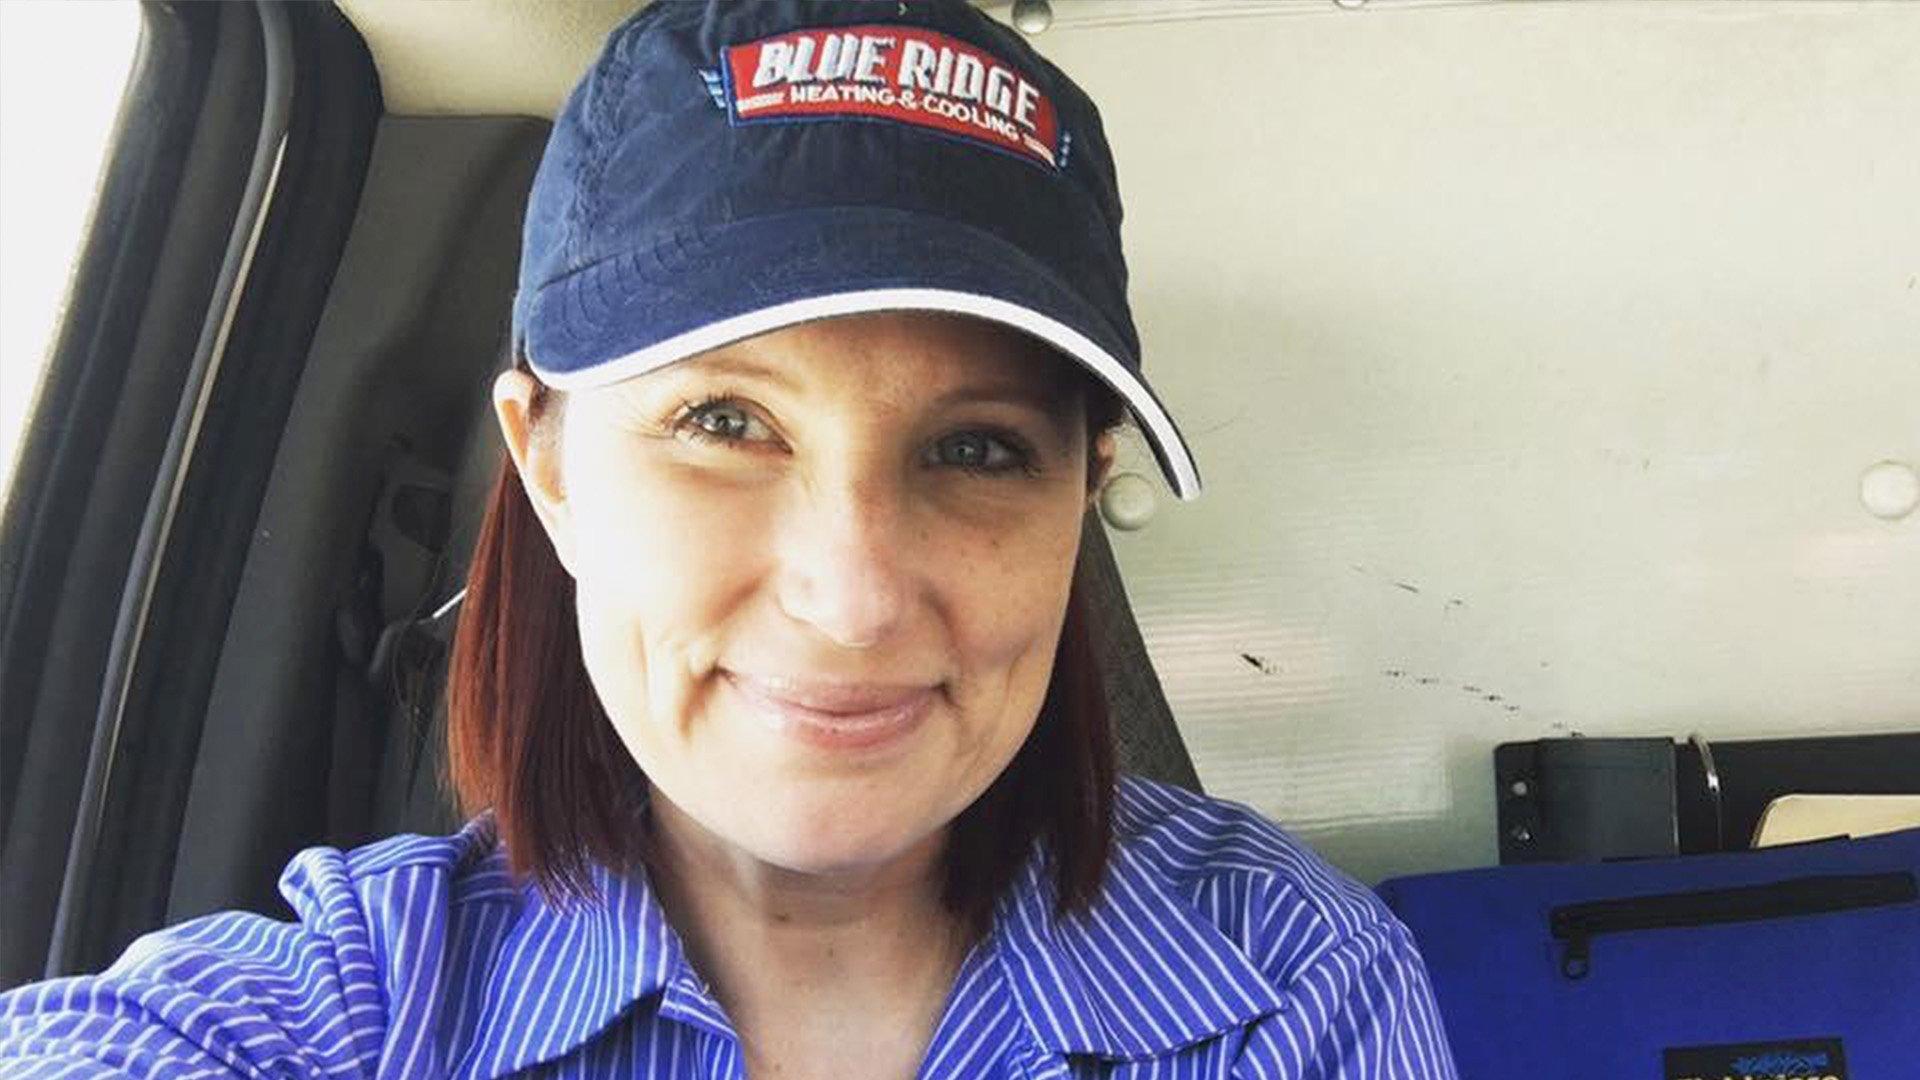 In a selfie, Jennifer S wears a Blue Ridge Heating & Cooling hat and striped shirt in her work truck.